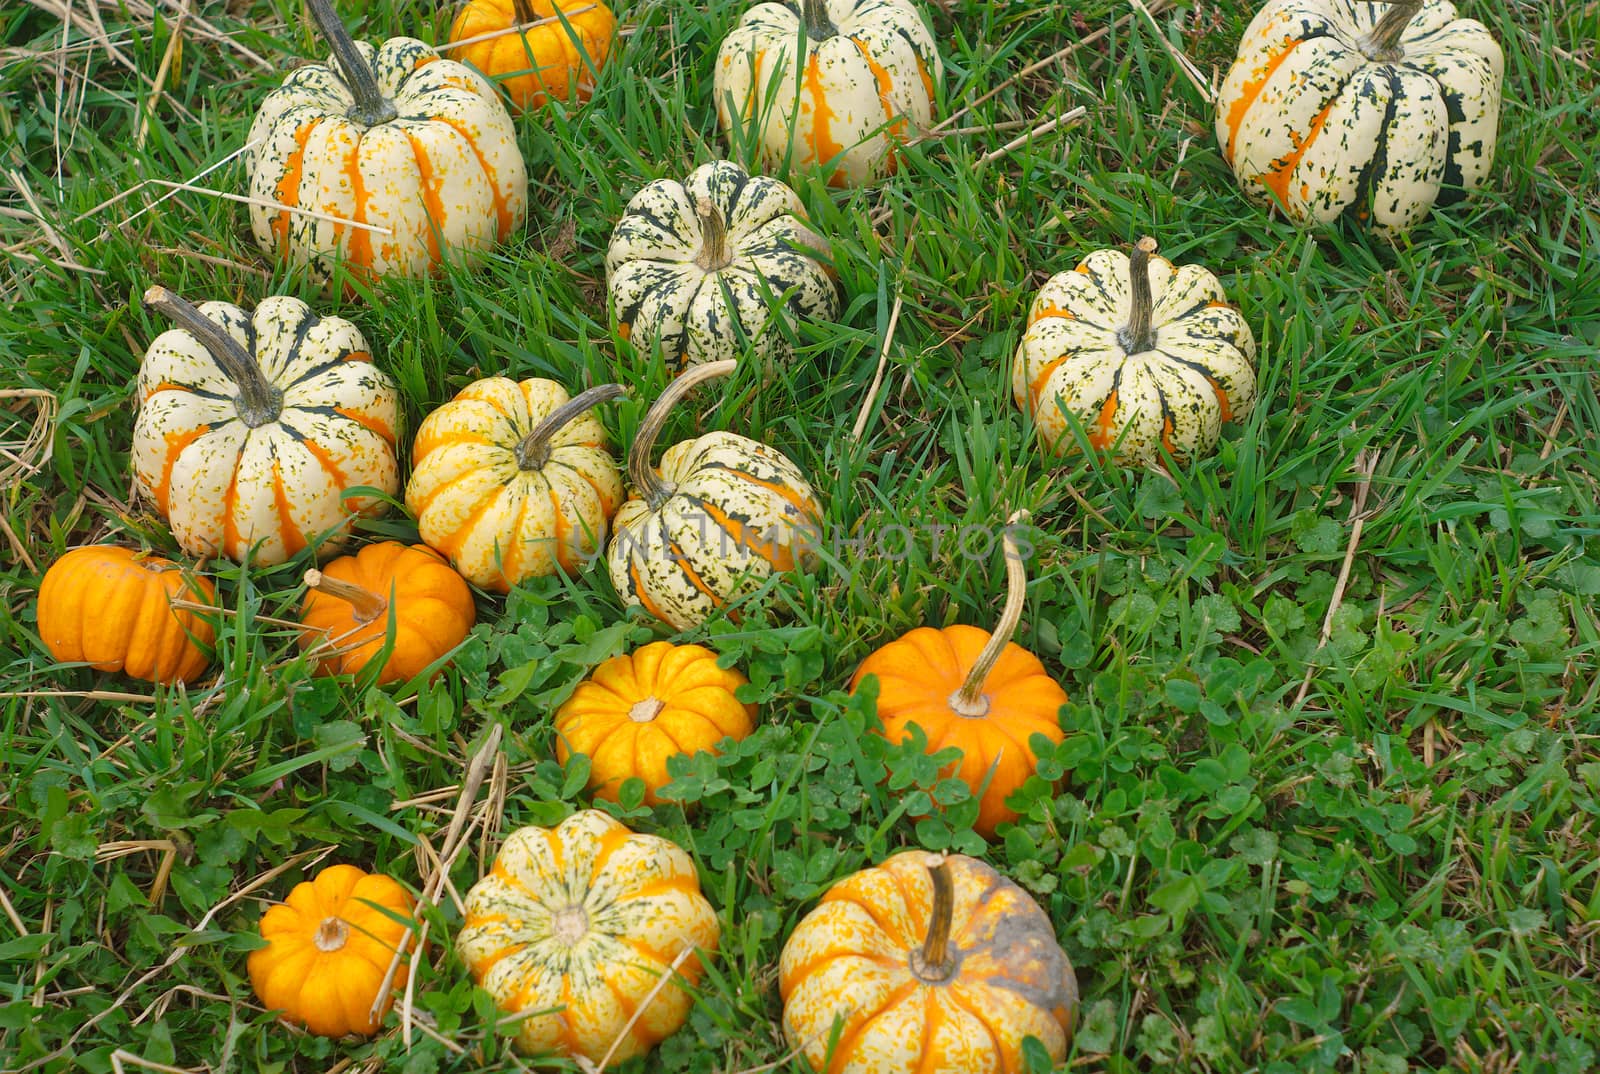 mini decorative pumpkins on grass for halloween or thanksgiving by jacquesdurocher